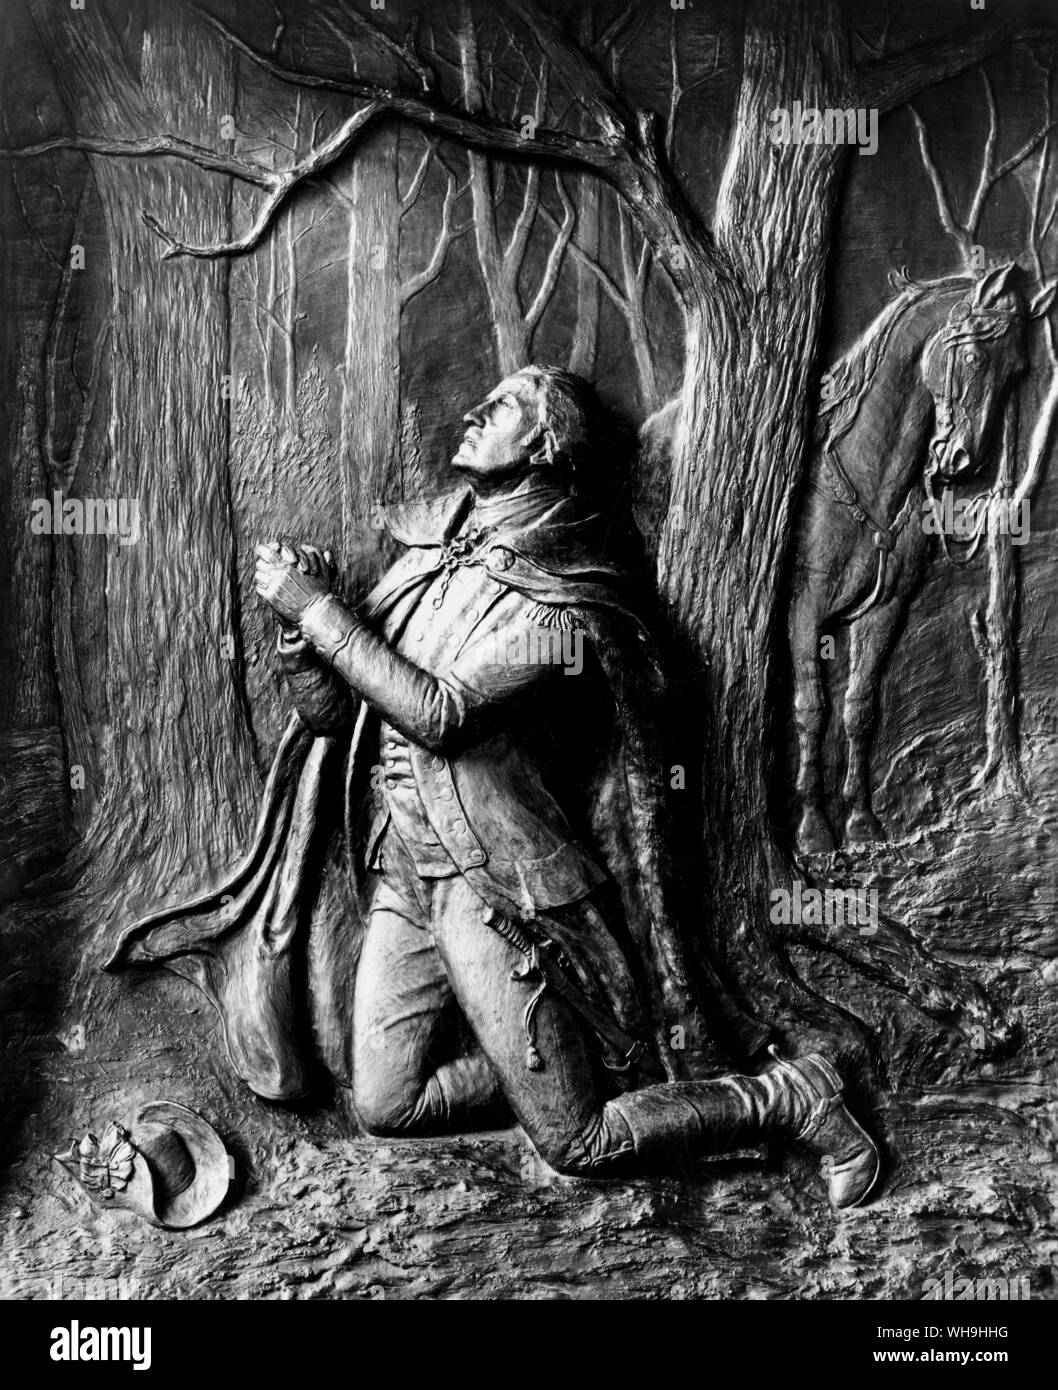 George Washington (1732-1799), 1st President of the USA praying at Valley Forge. Bas-relief by Kelly, 1907. Stock Photo